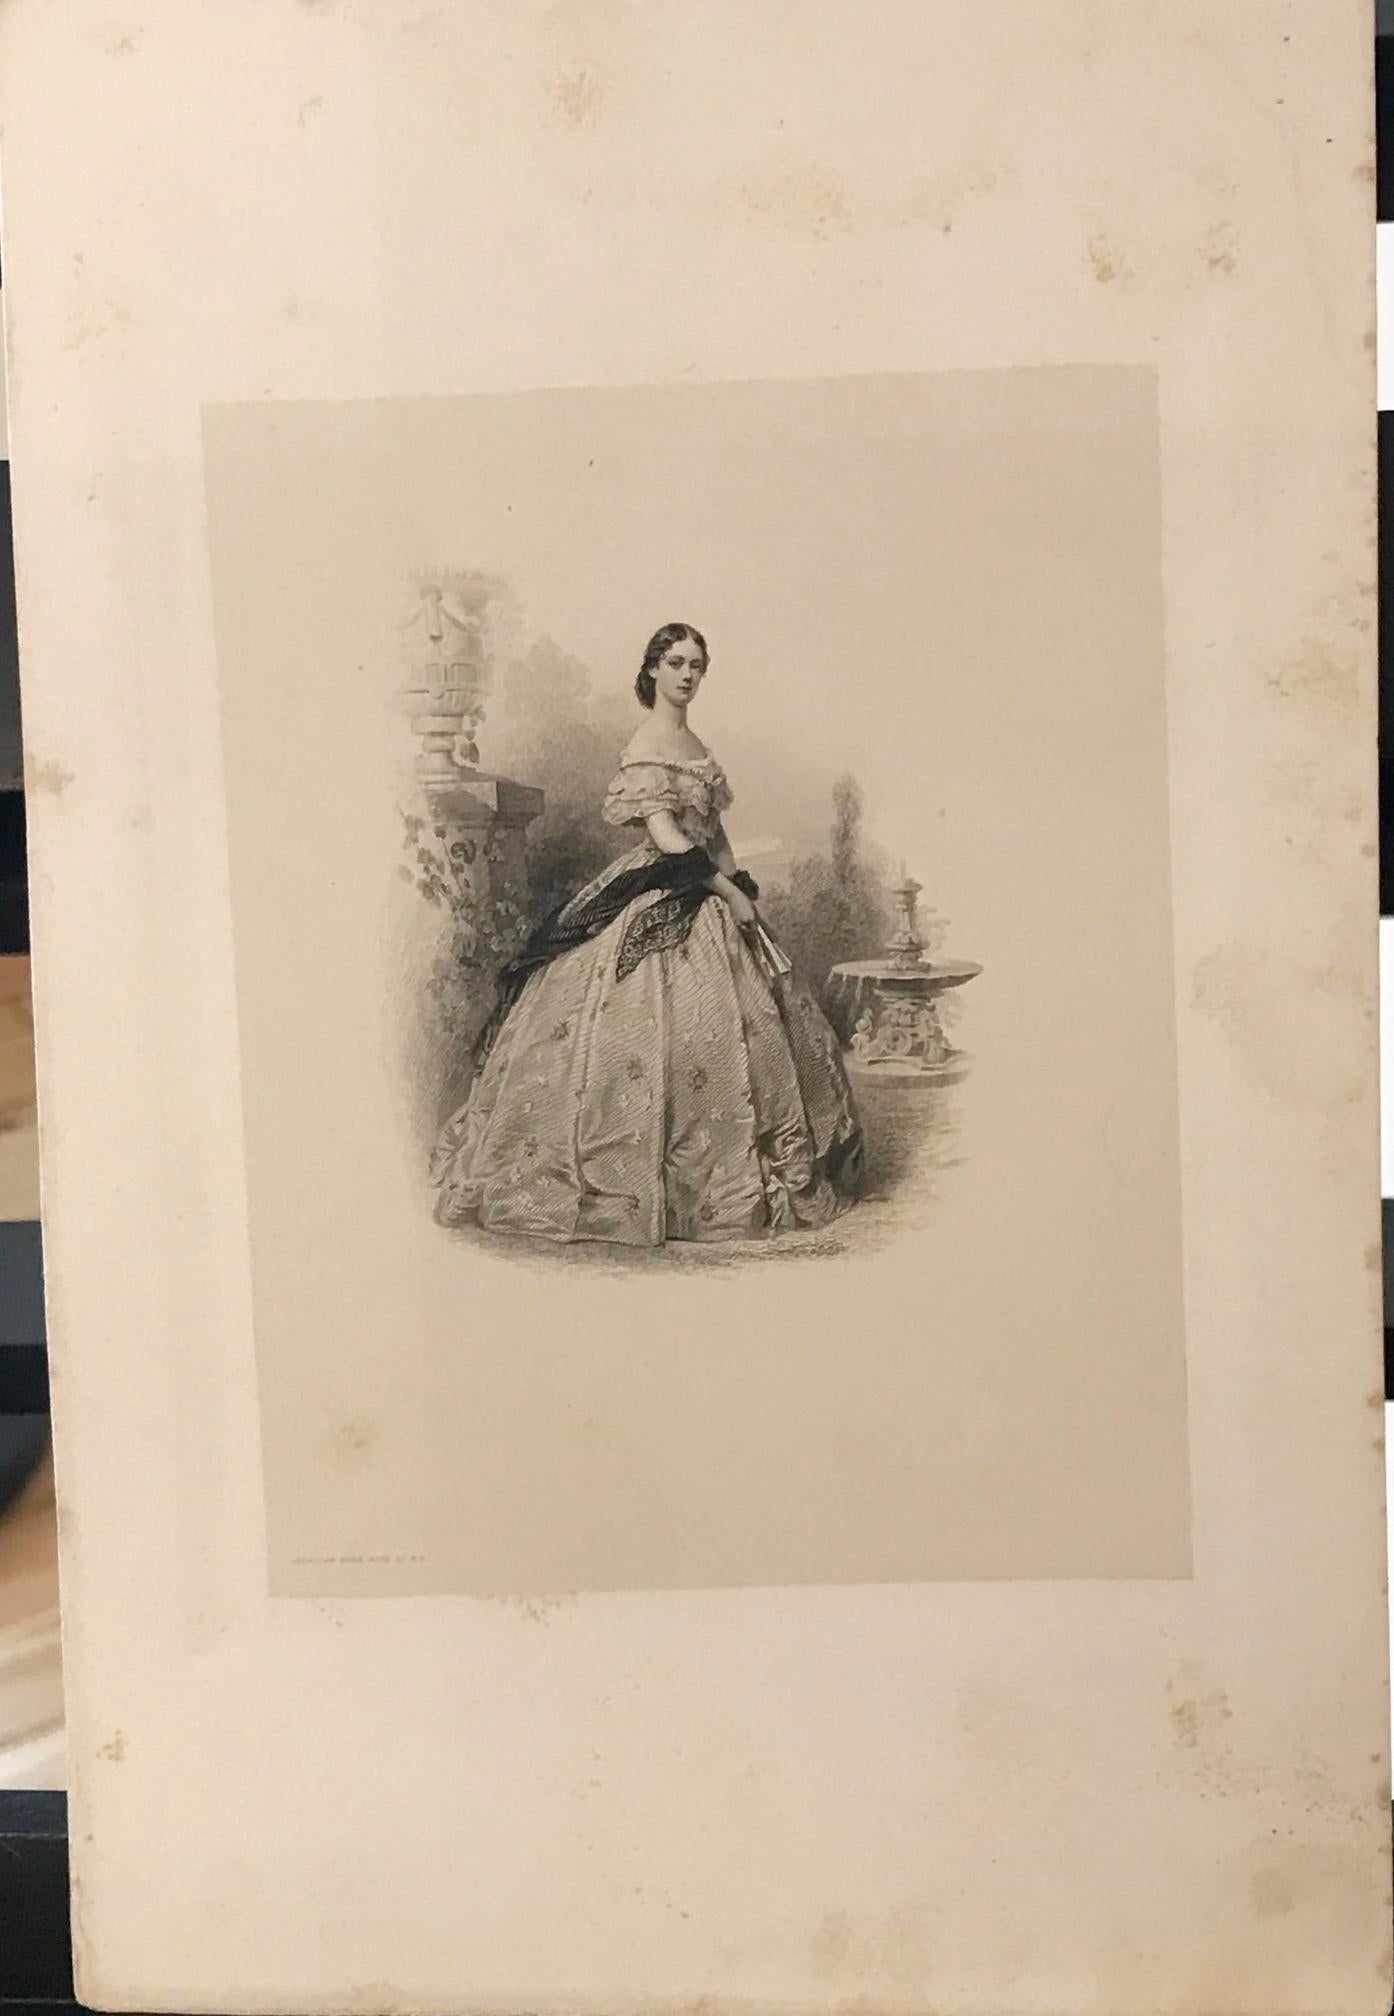 Showing a Princess (probl. Princess Alexandria) or a noble girl in a very stylish ball gown (Hoop skirt, stole and fan) in a garden scene (Fountain in the background and on the left side a stone stele with an flower pot on it), American Bank Note